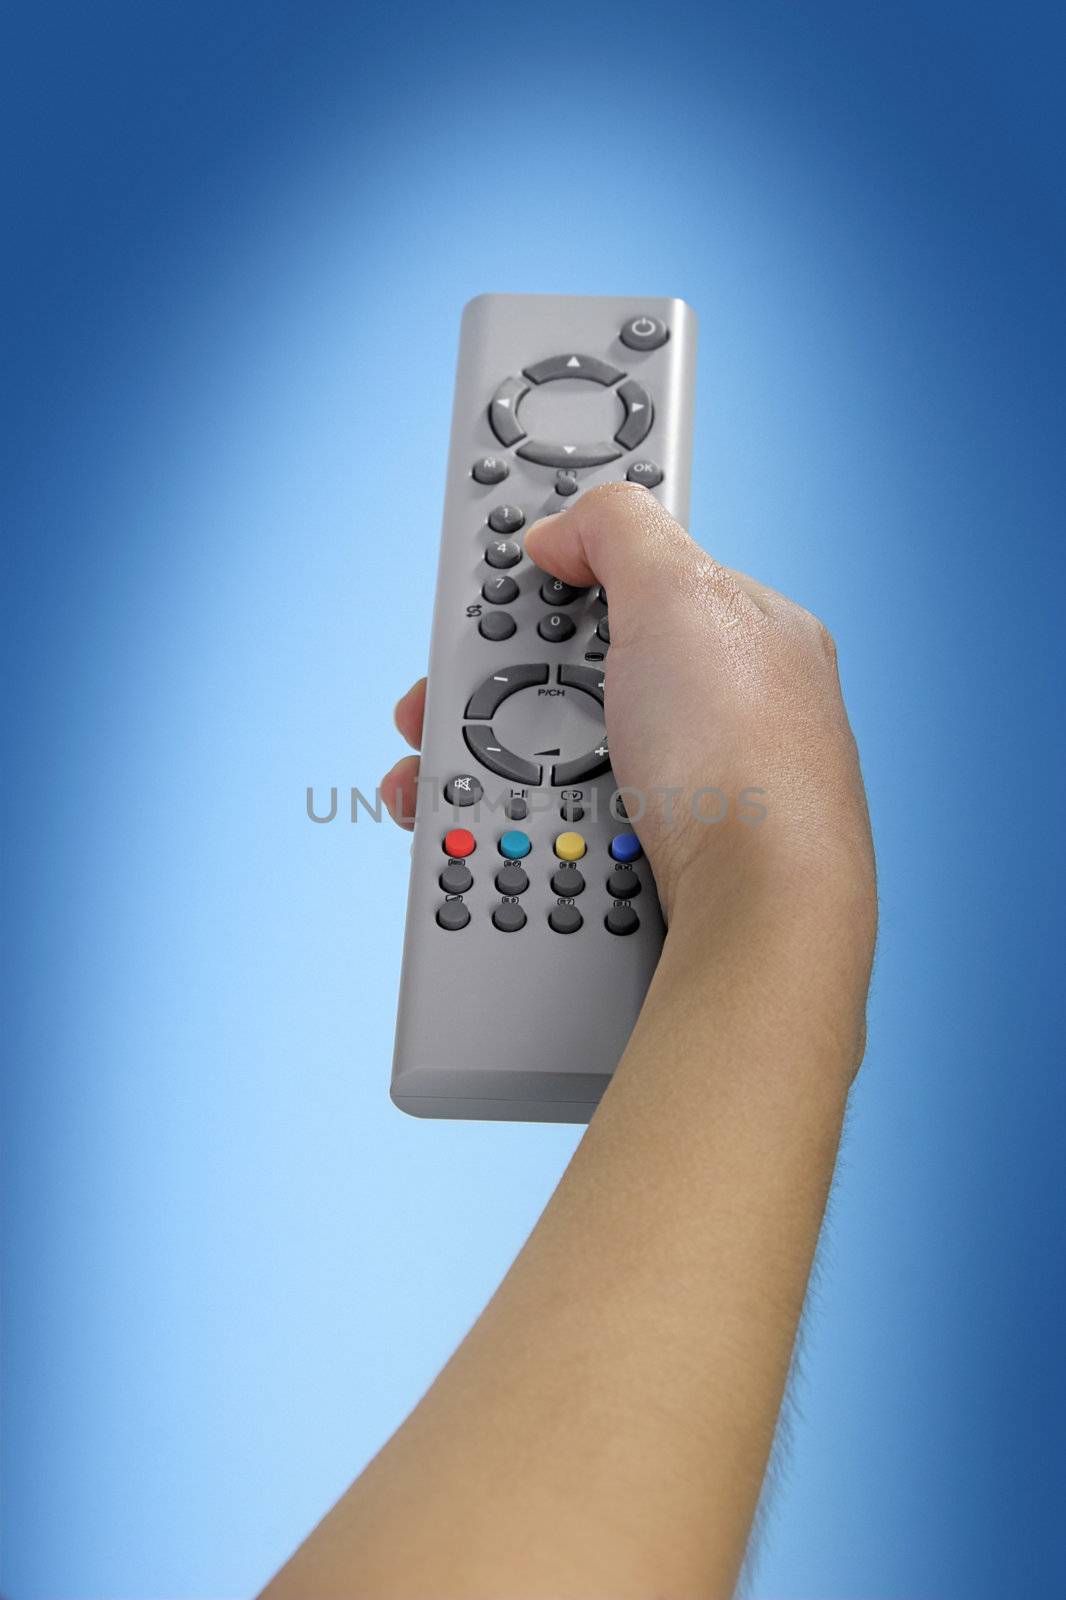 TV remote by Iko